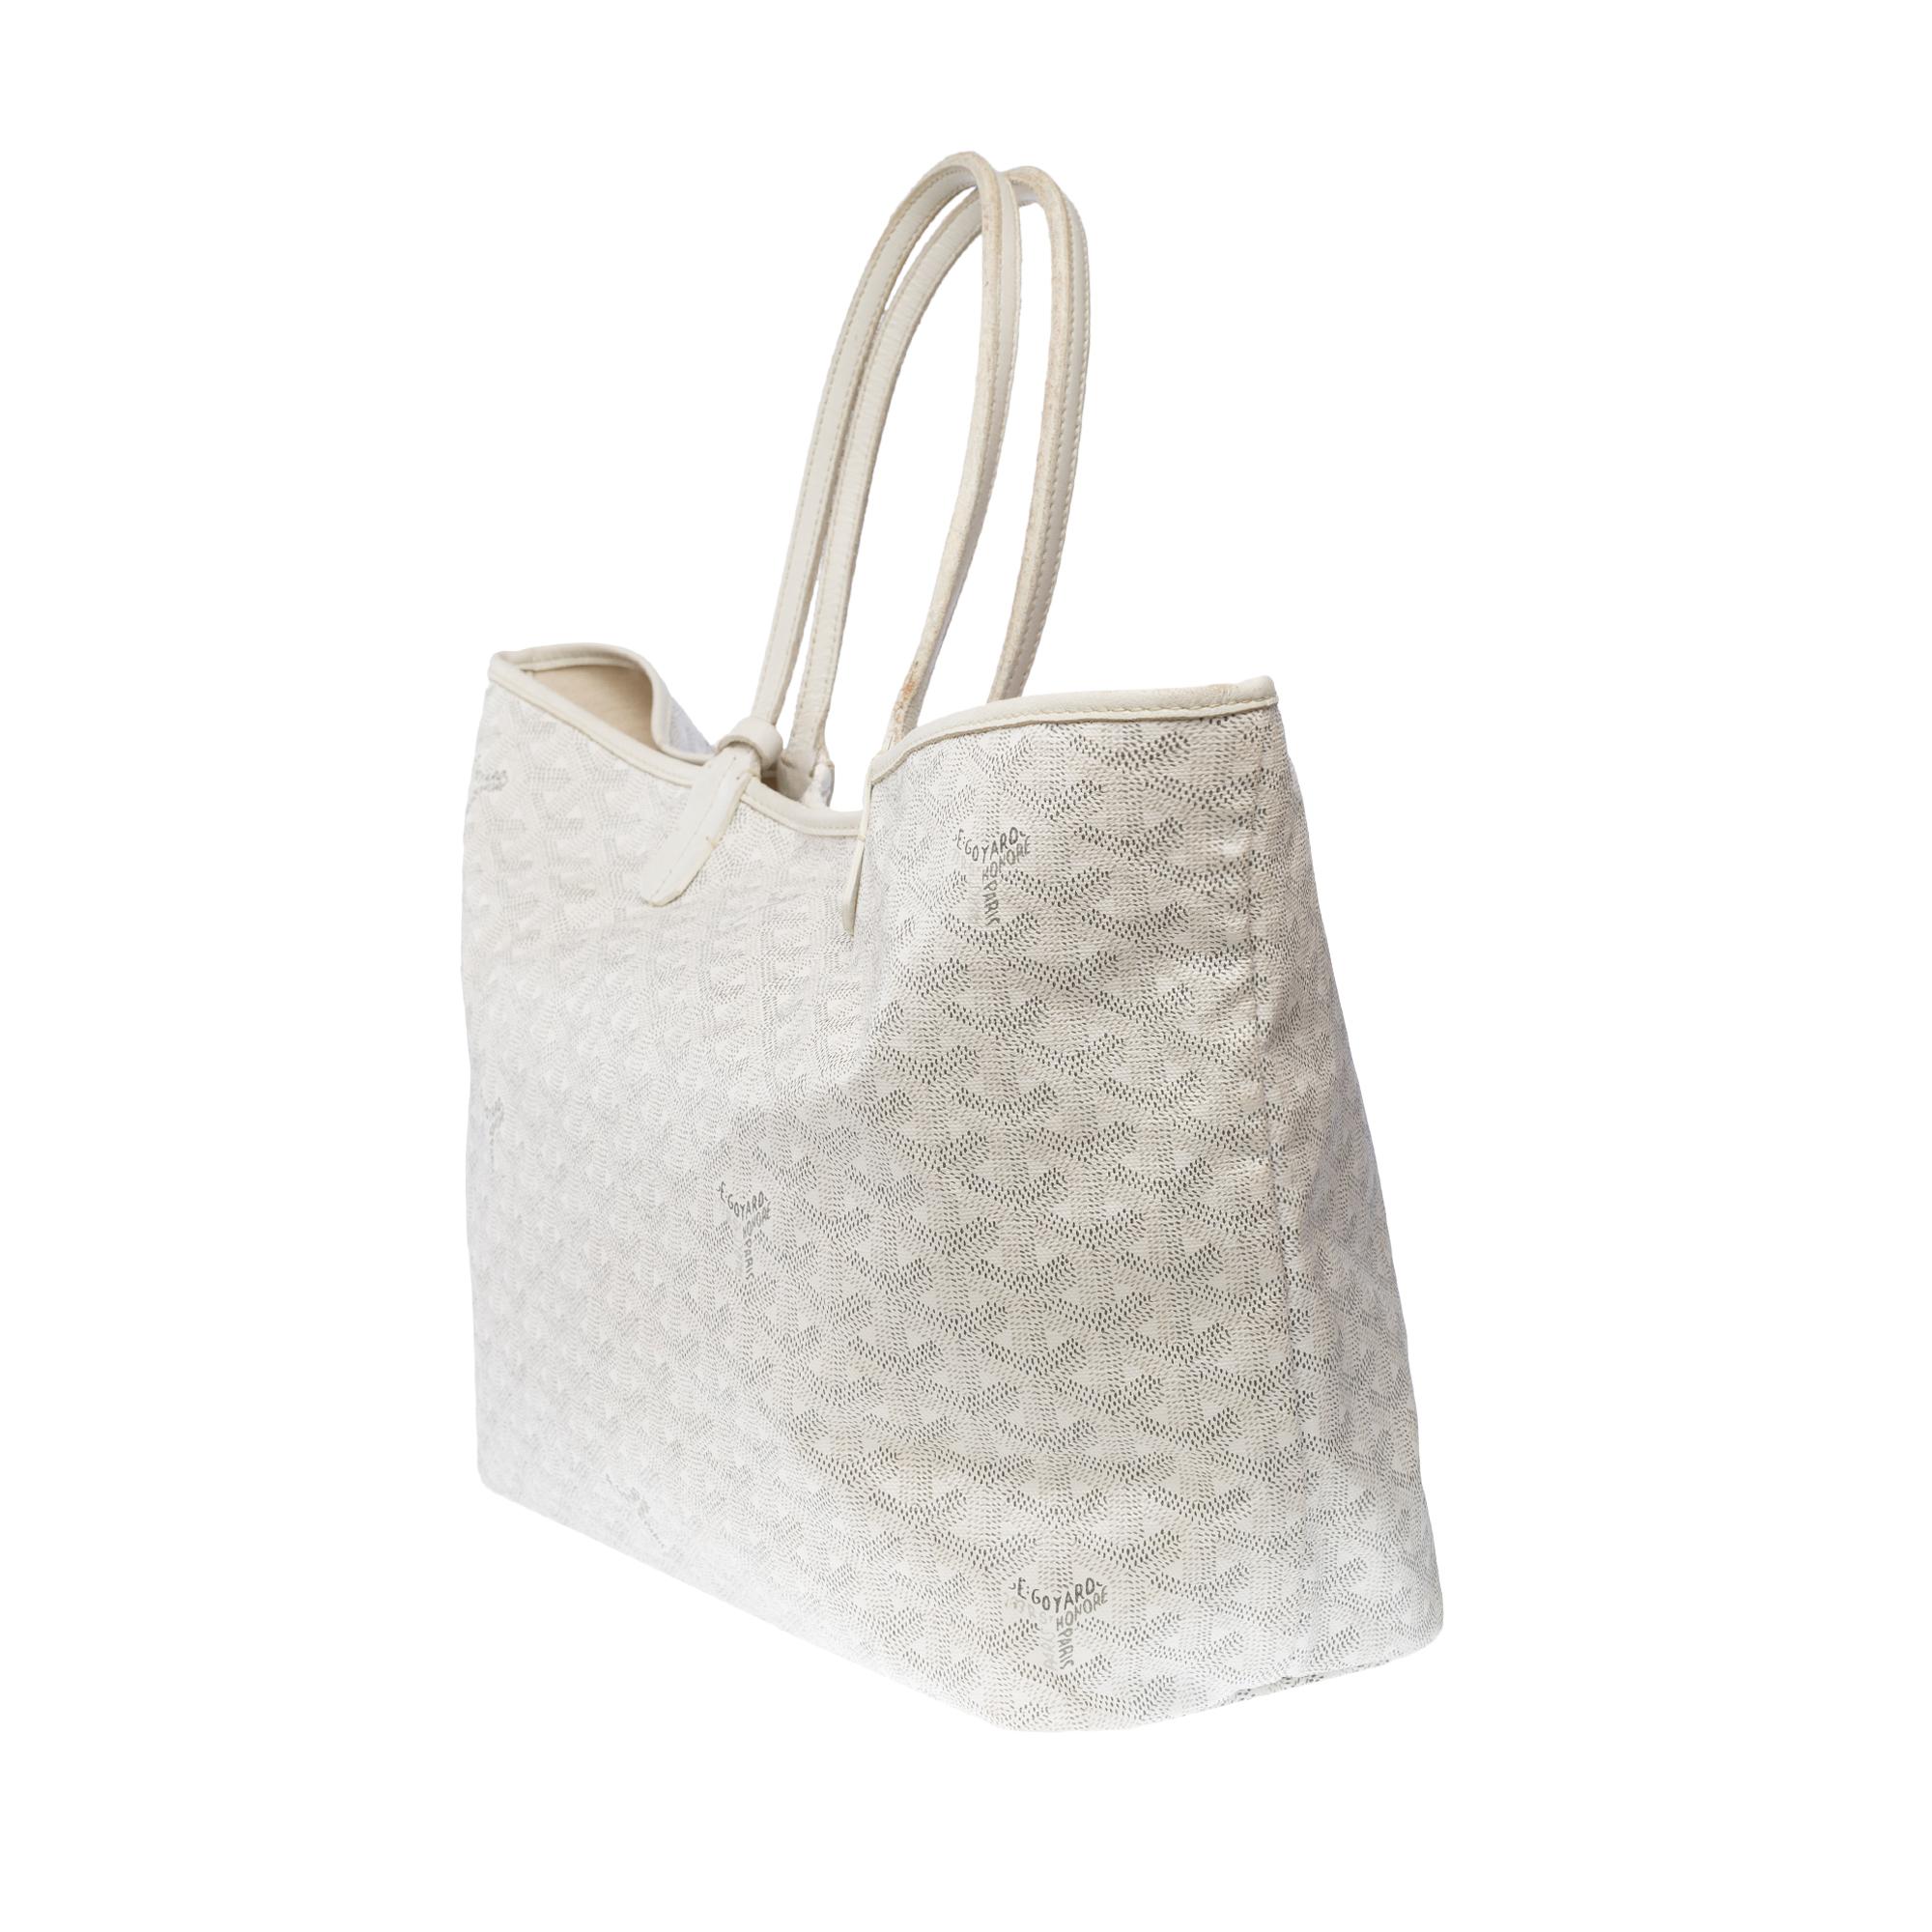 The Coveted Goyard Saint-Louis PM Tote bag in White canvas and leather, SHW For Sale 1